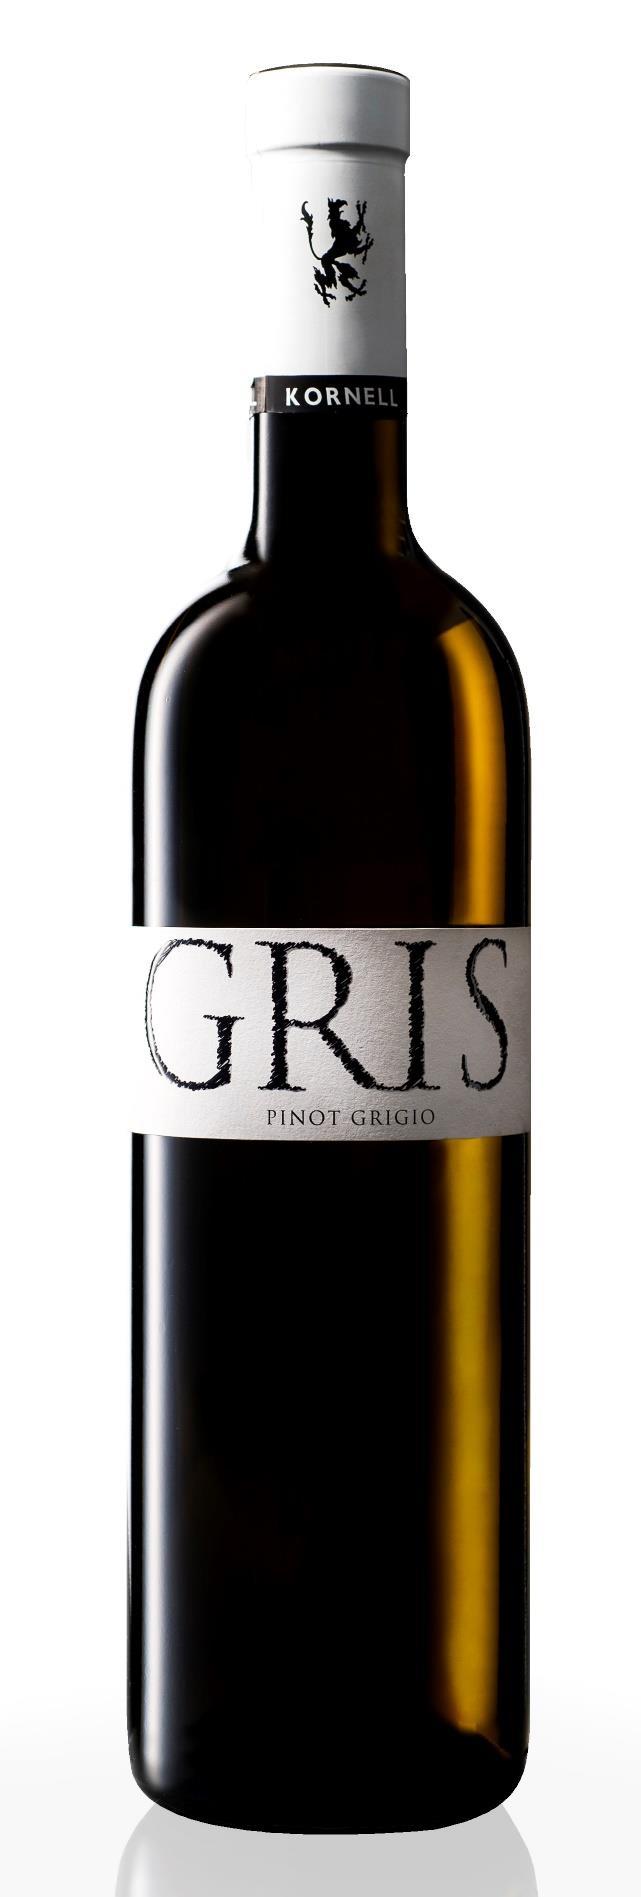 GRIS Pinot Grigio 2016 First vintage 2015 350 m South ovest Slope 15-20 % Pruning System Guyot Vines/Hectare 6000 Yield/Hectare 65 hl Beginning of September Vinification: Fermentation in stainless